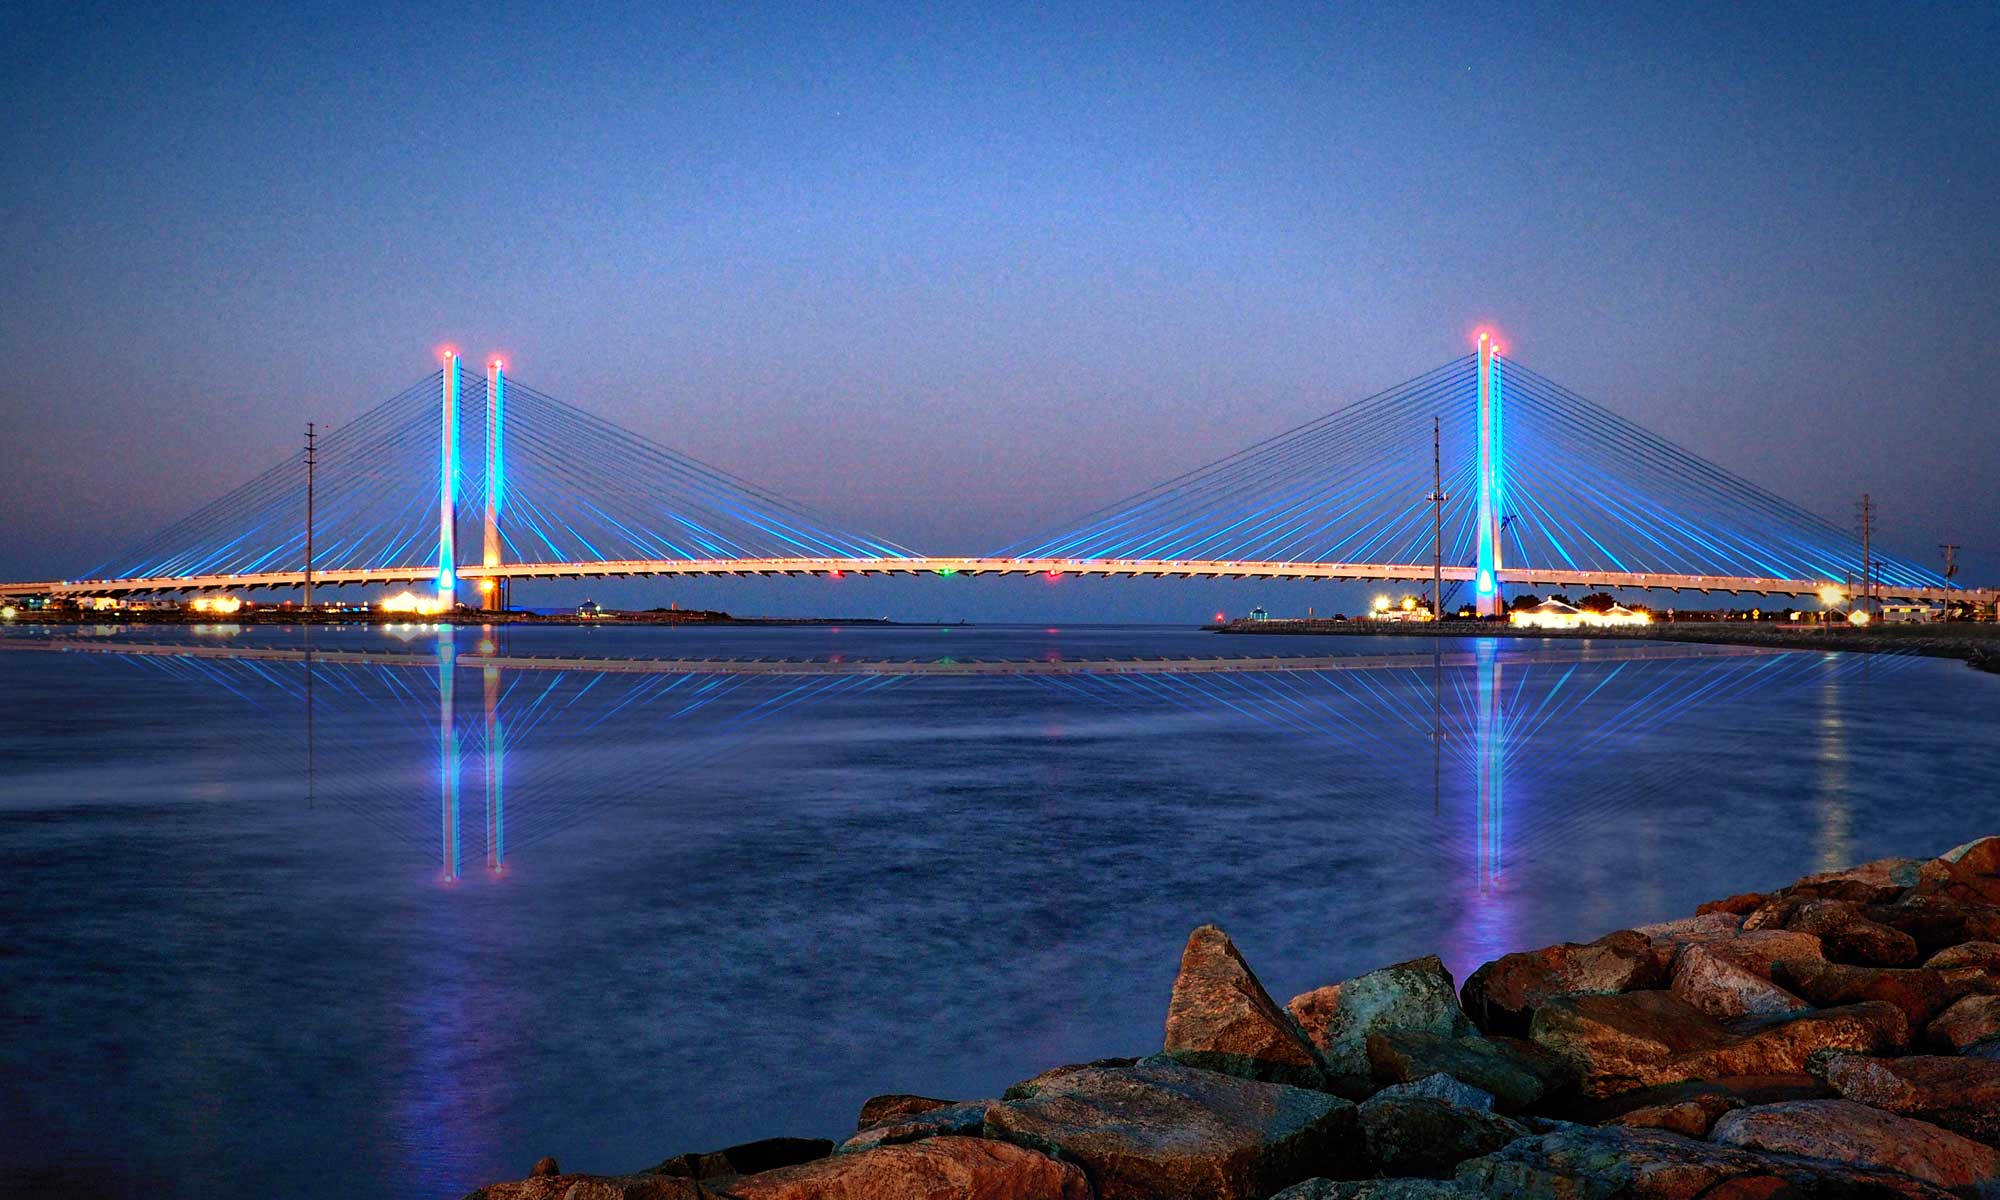 Charles W. Cullen Bridge over the Indian River Inlet